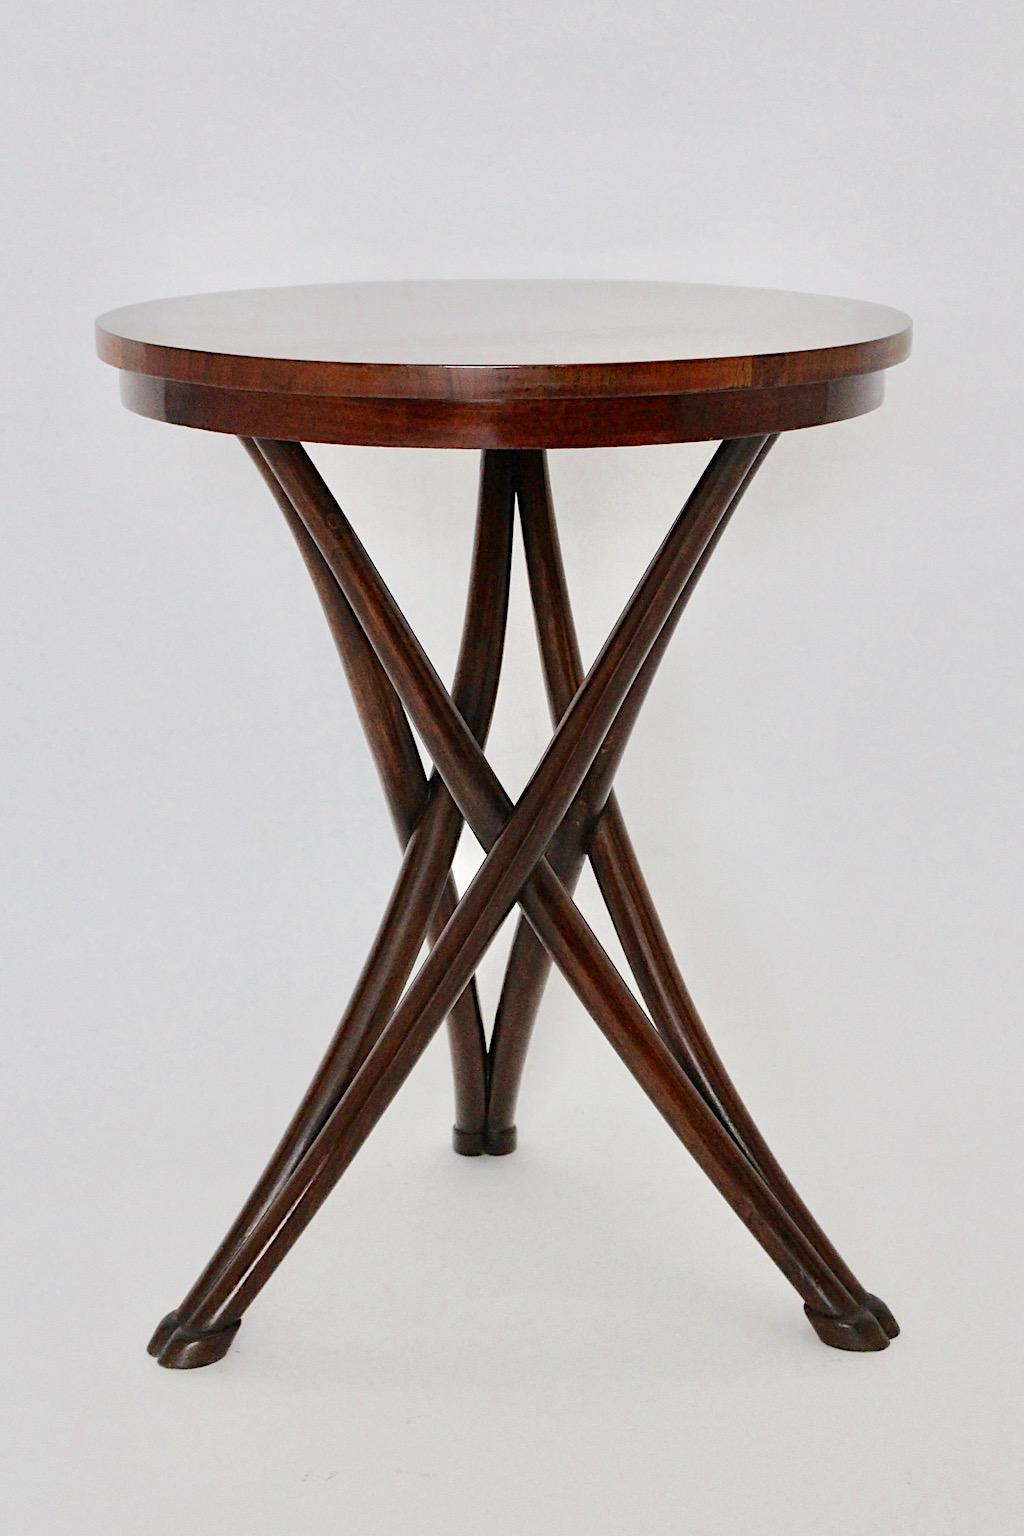 Austrian Historicism Beech Bentwood Side Table No 13 by August Thonet circa 1880 Vienna For Sale